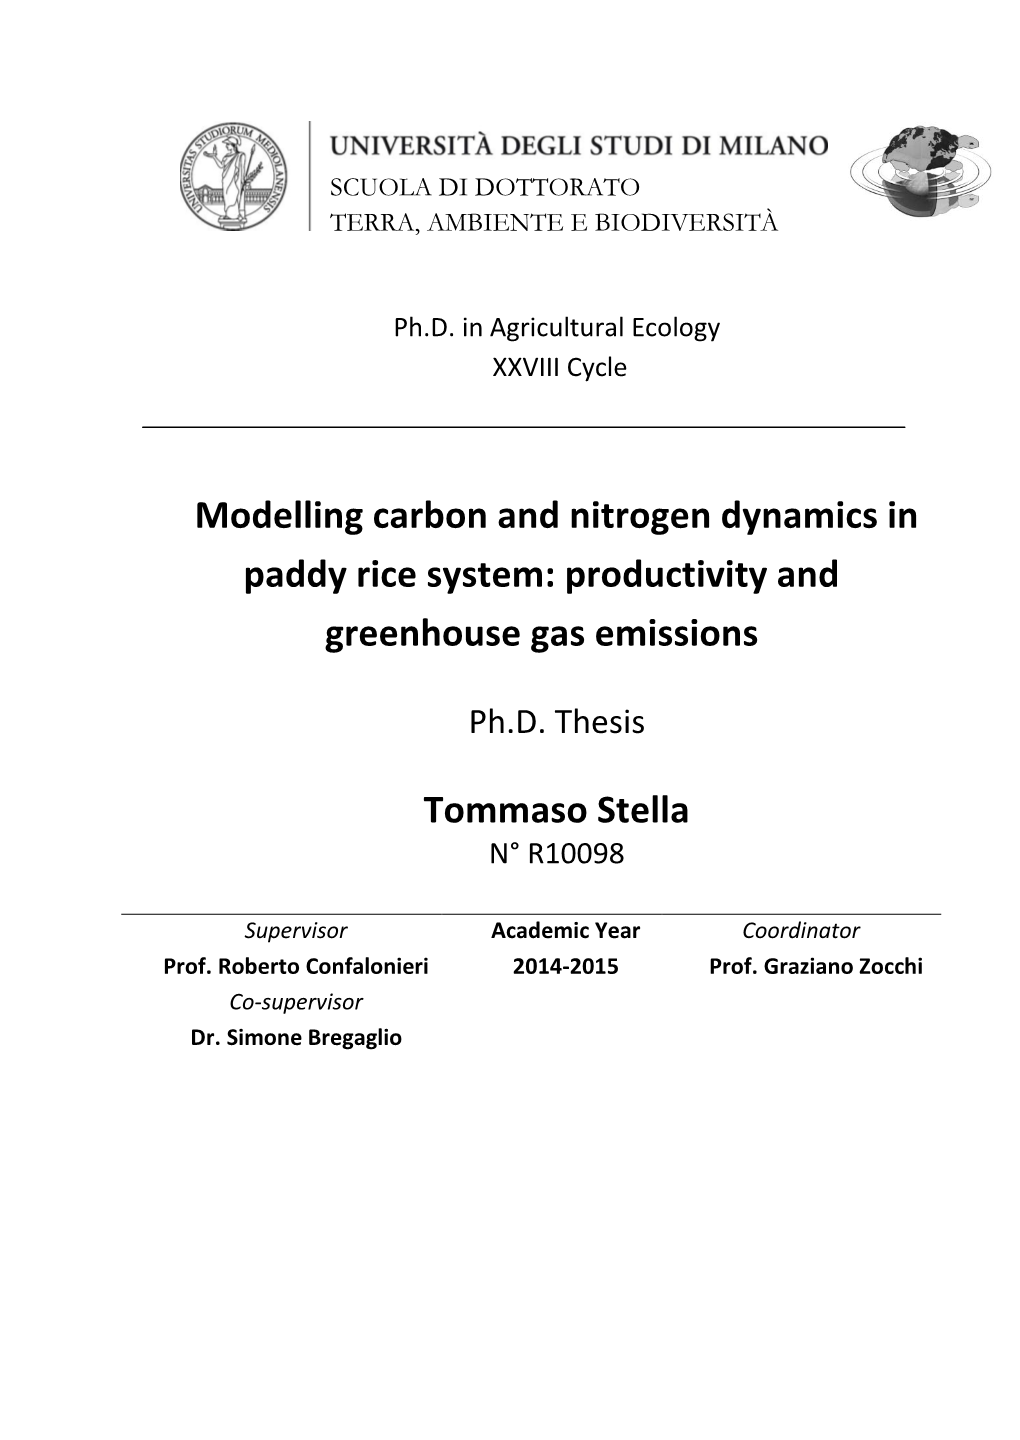 Modelling Carbon and Nitrogen Dynamics in Paddy Rice System: Productivity and Greenhouse Gas Emissions